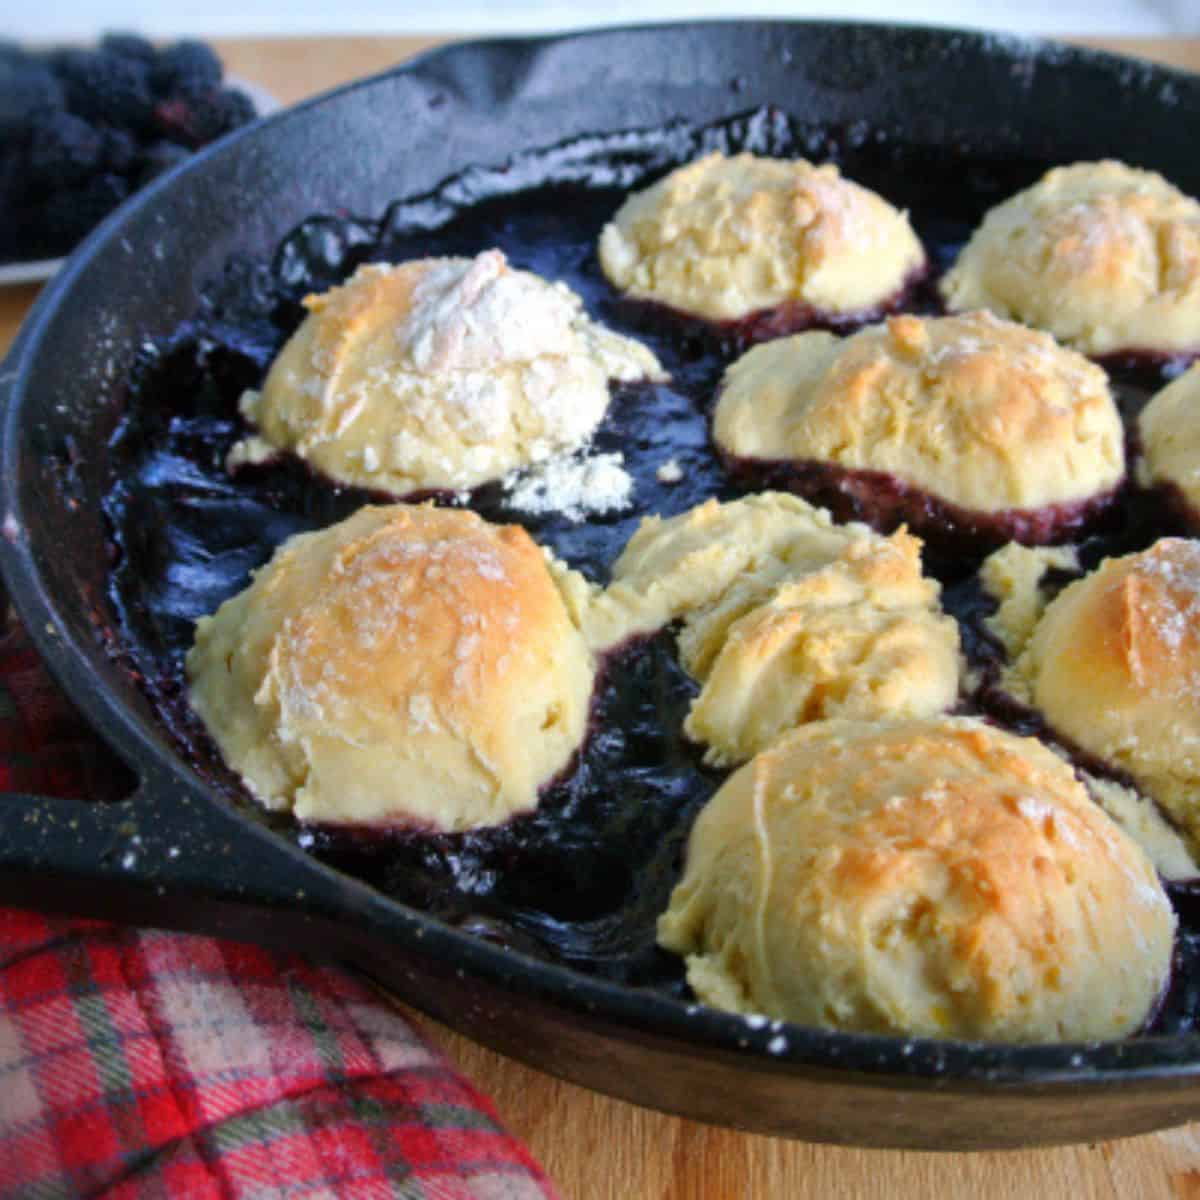 A Blackberry grunt dessert (blackberry filling with biscuits on top) in a cast iron pan.